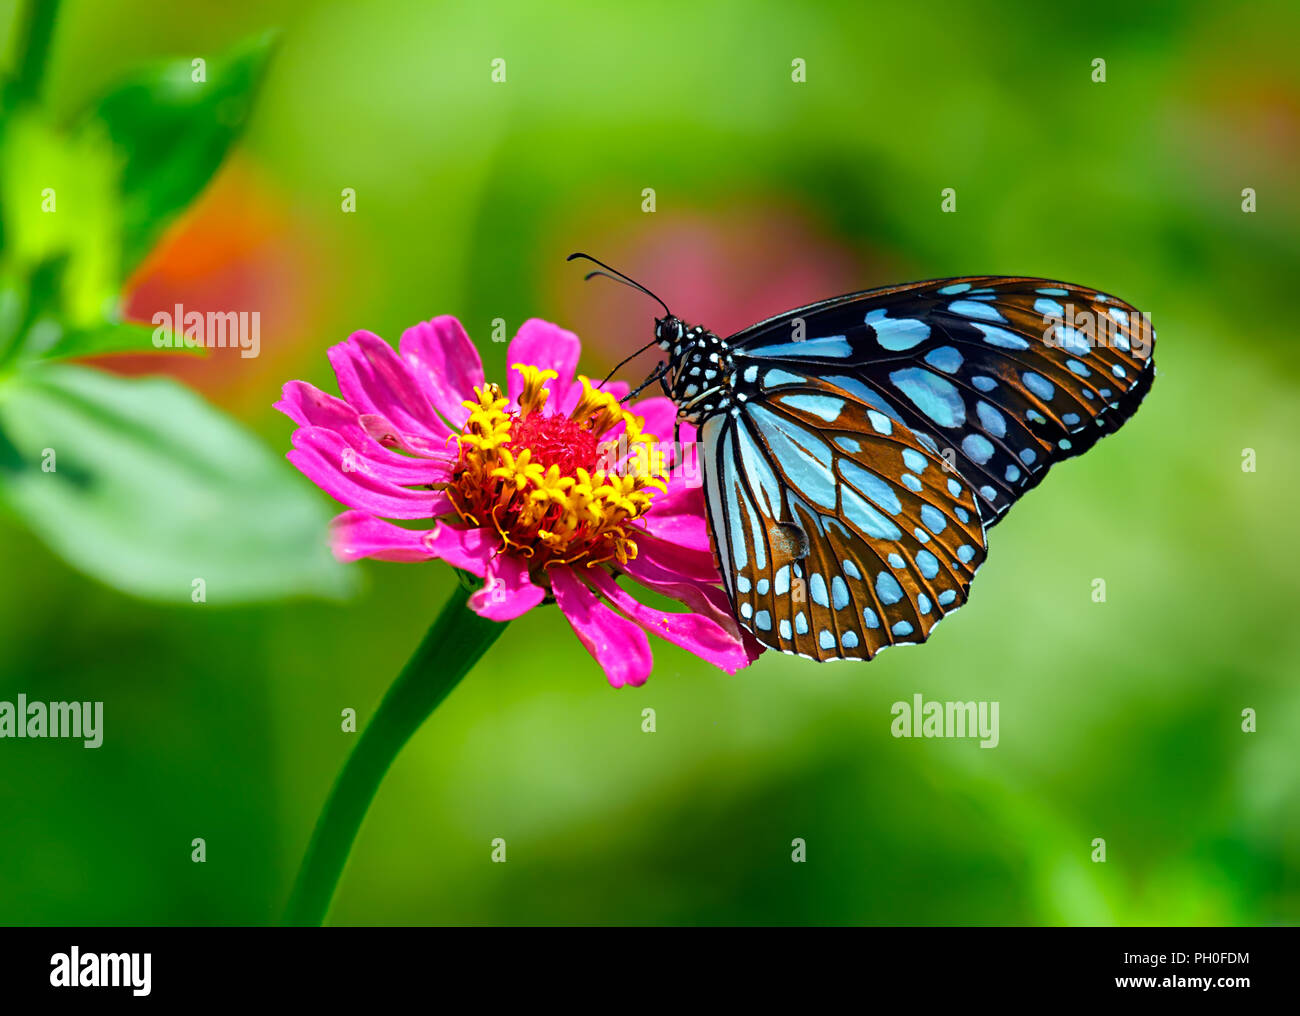 Blue tiger butterfly or Danaid Tirumala limniace on a pink zinnia flower with green blurred background. Stock Photo